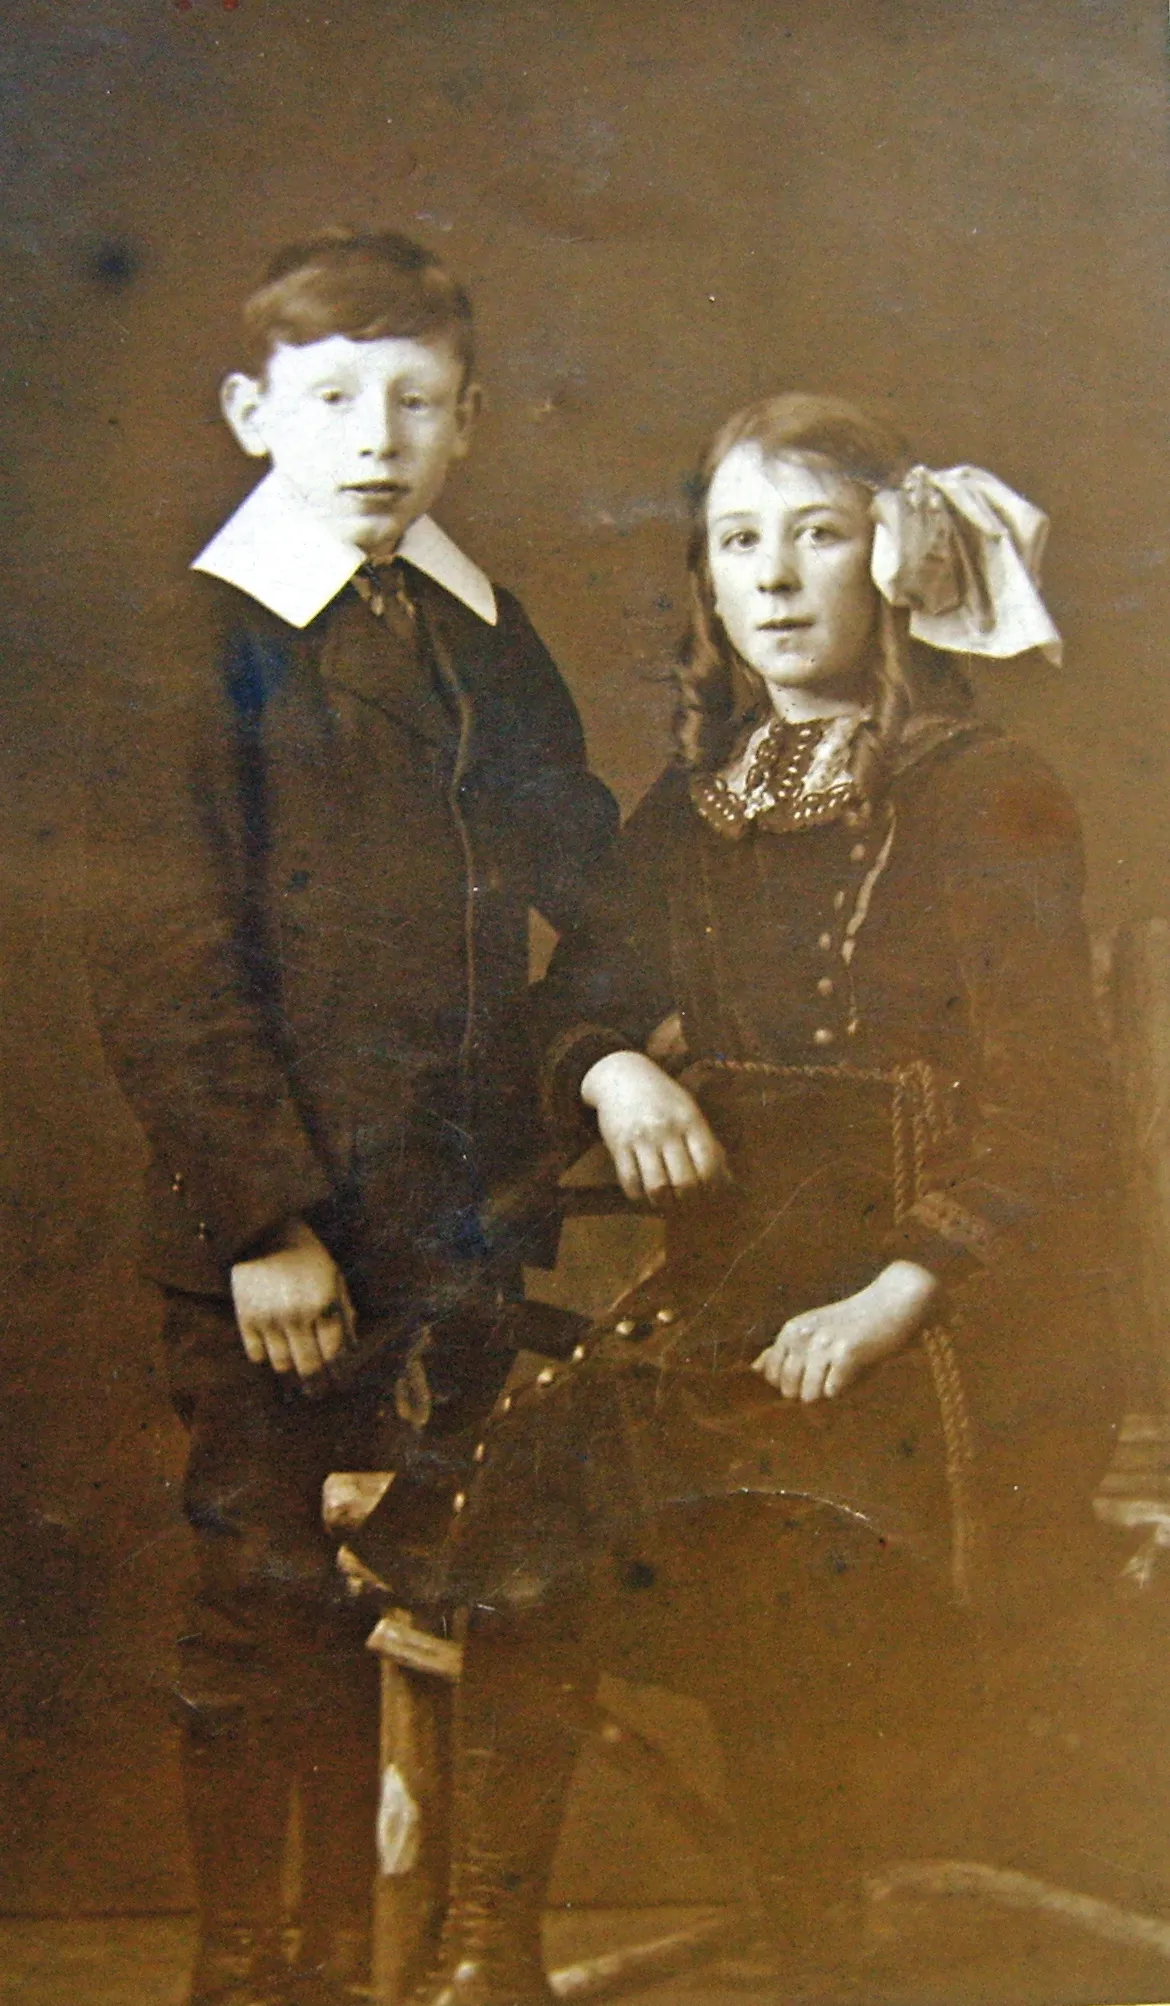 Black and white photograph of a little boy in a suit and a little girl with a bow in her hair.